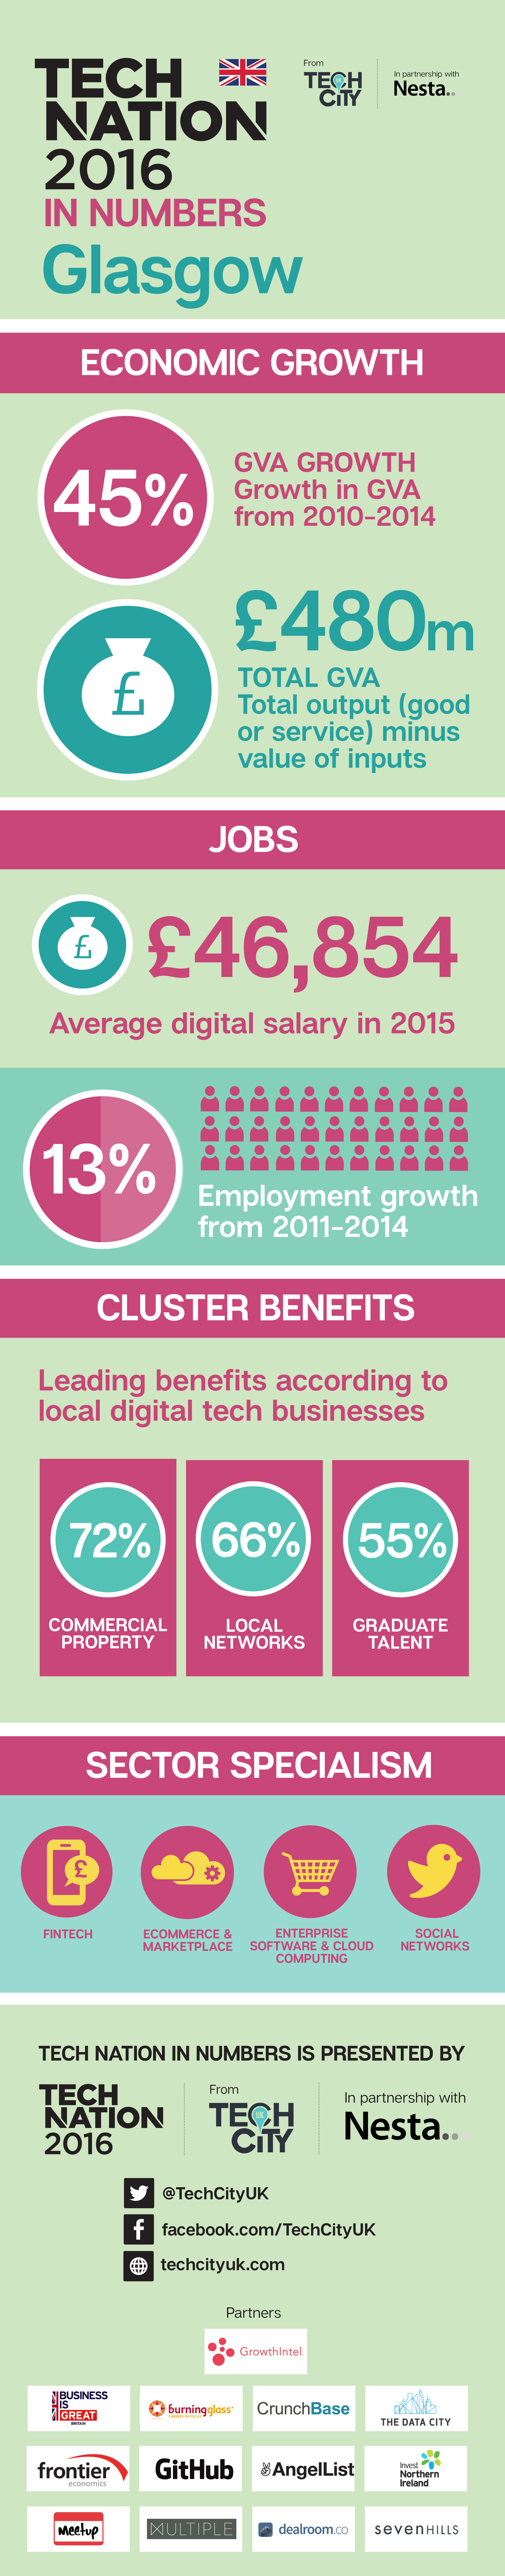 Tech Nation 2016 infographic for Glasgow